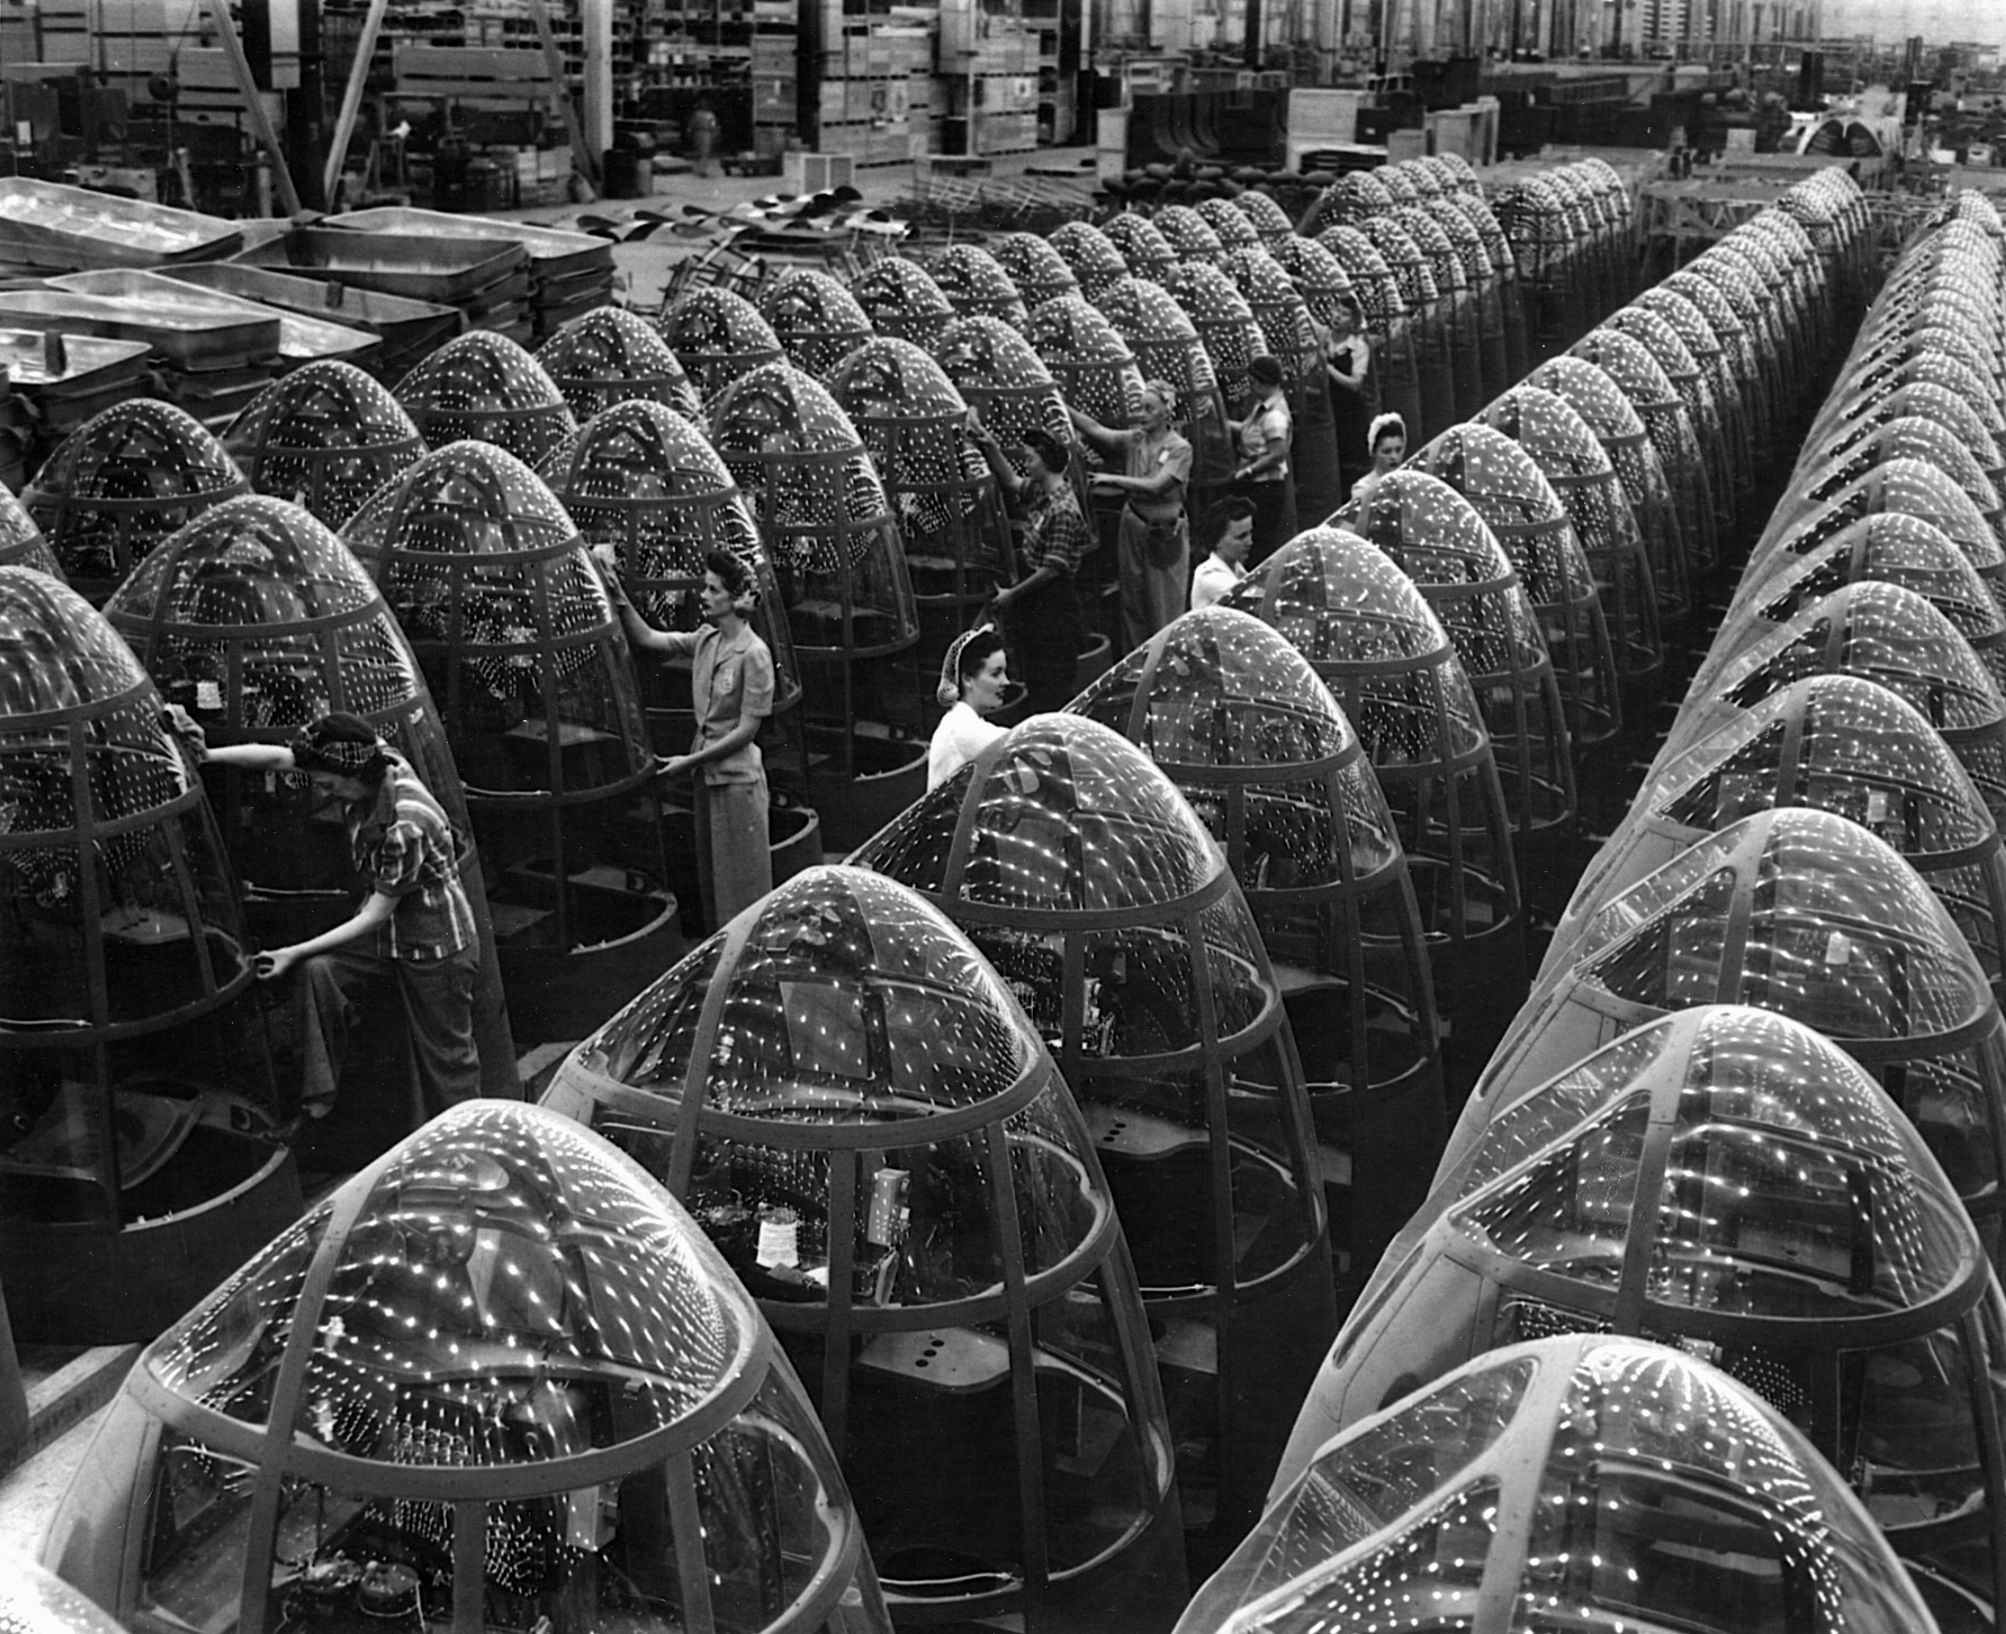 Female workers finish transparent noses built for A-20 attack bombers at Douglas Aircraft’s Long Beach, Calif. manufacturing facility. The Japanese high command severely underestimated the Allied industrial capabilities, with disastrous results.